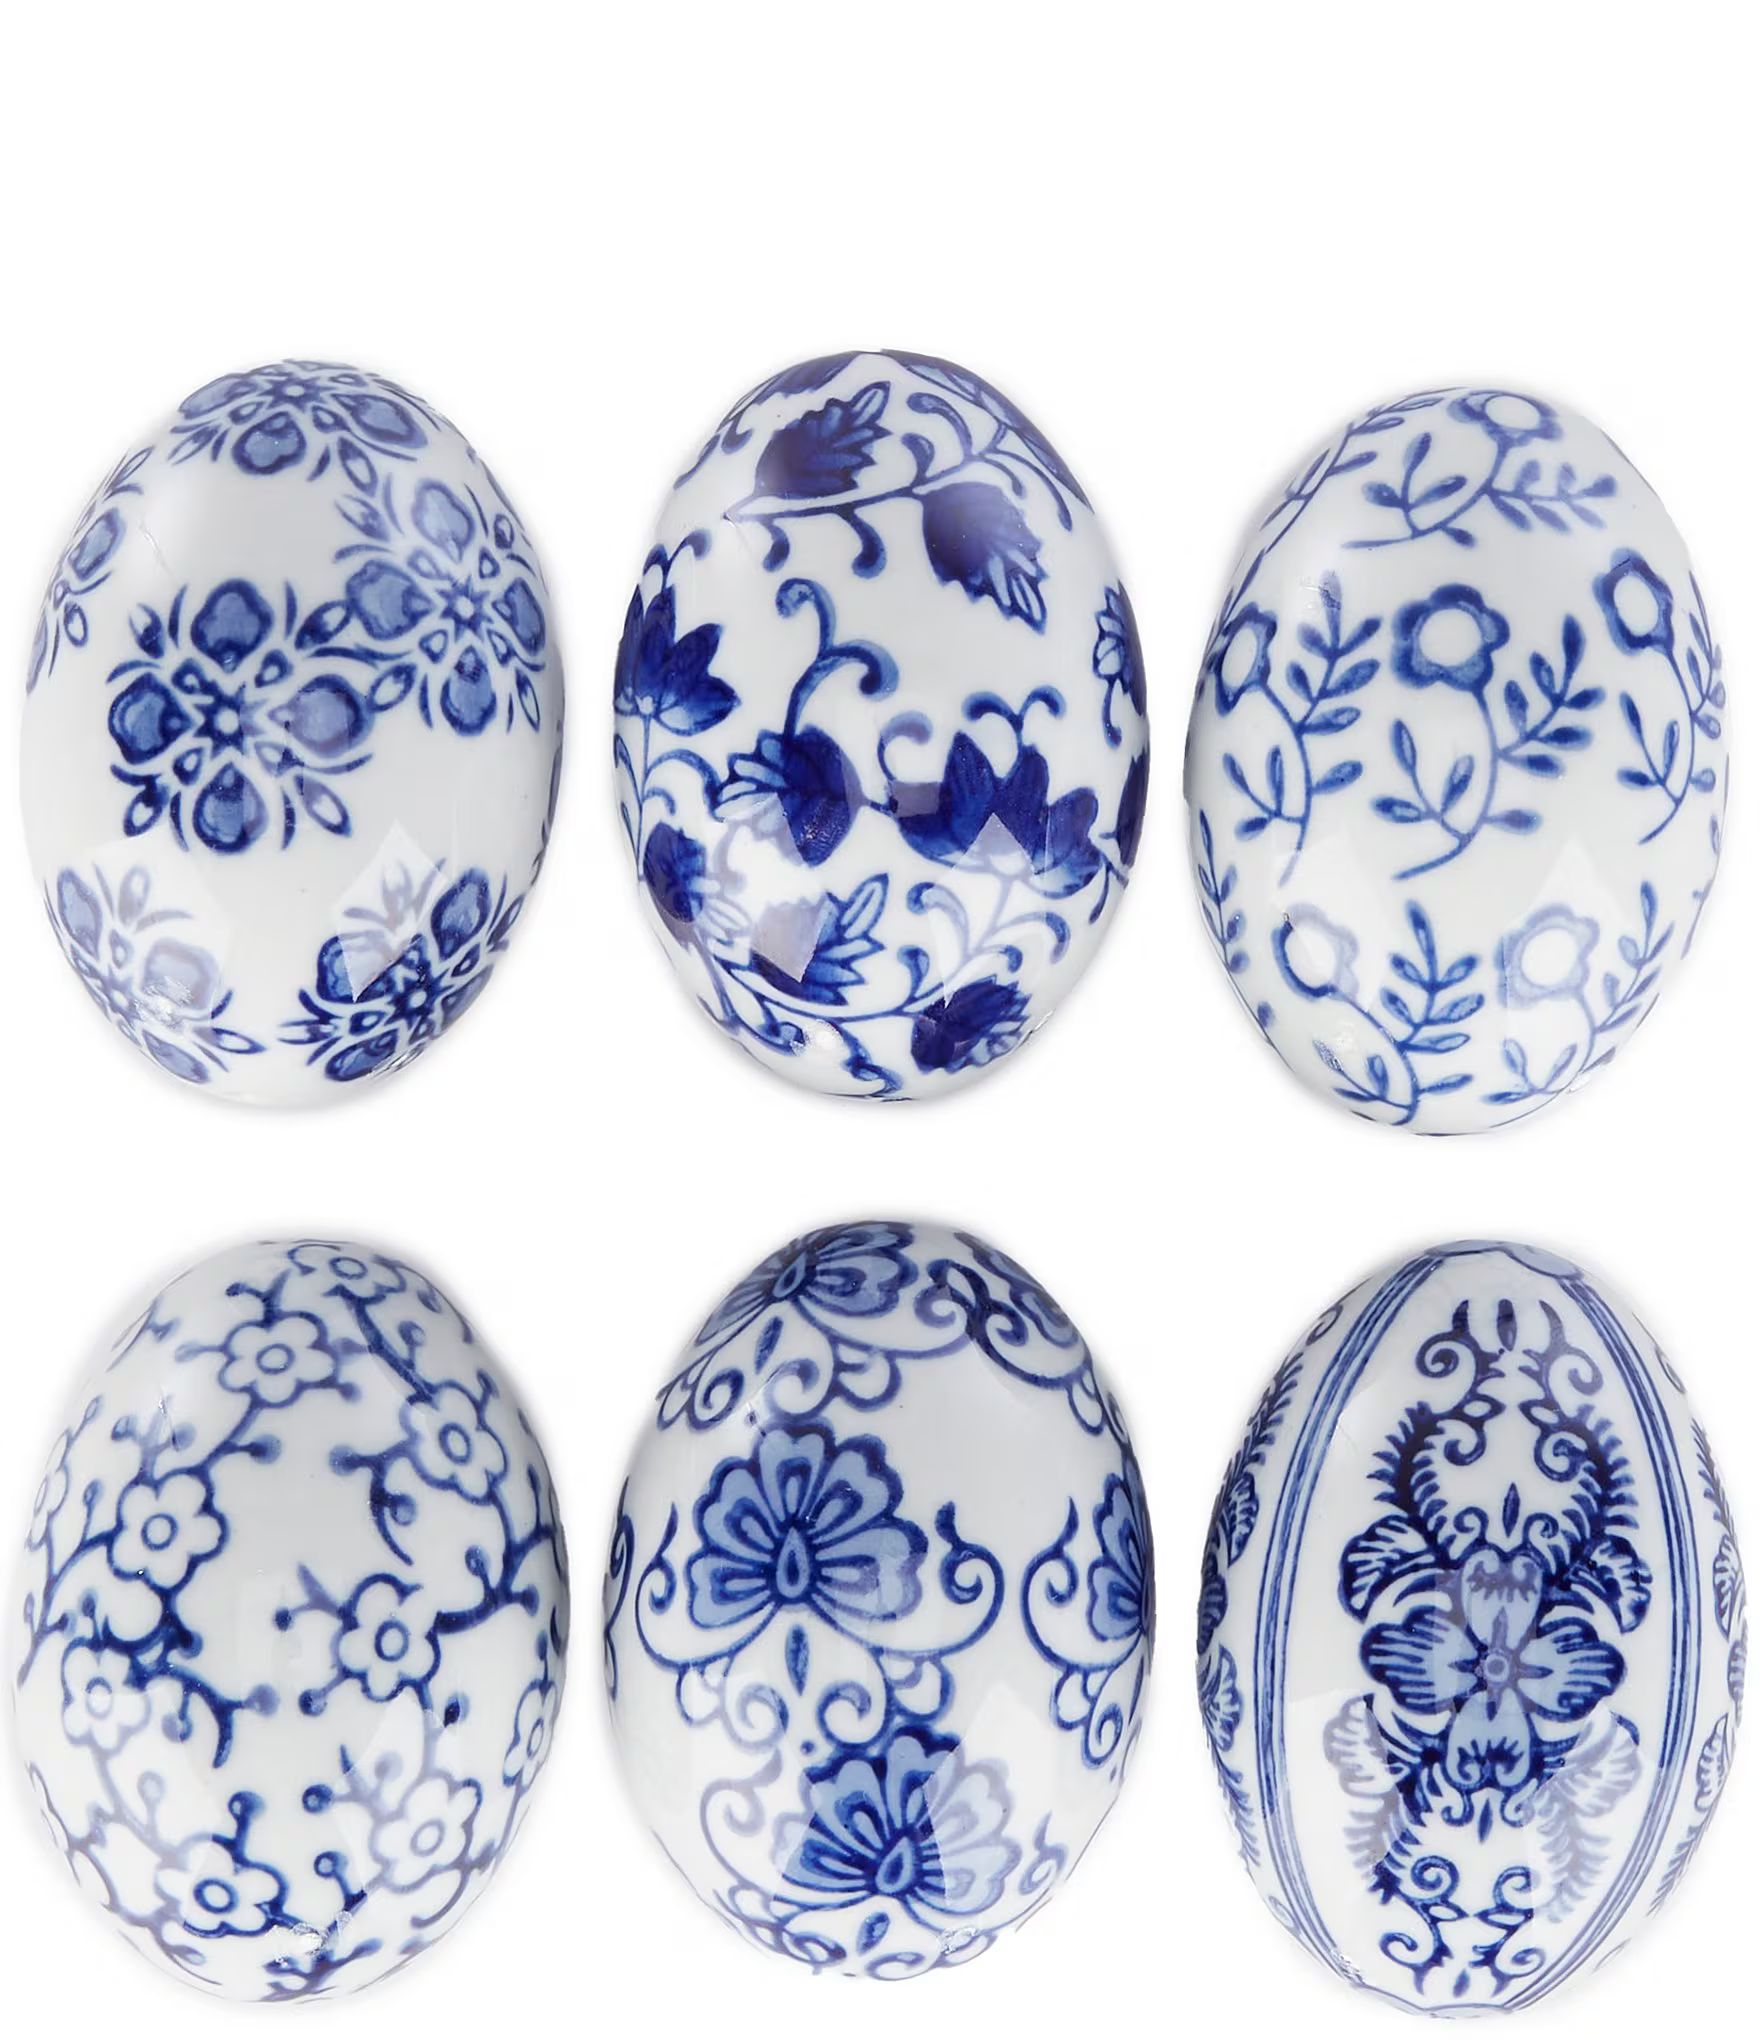 Easter Collection Blue & White Chinoiserie Decorative Egg 6-Piece Set | Dillard's